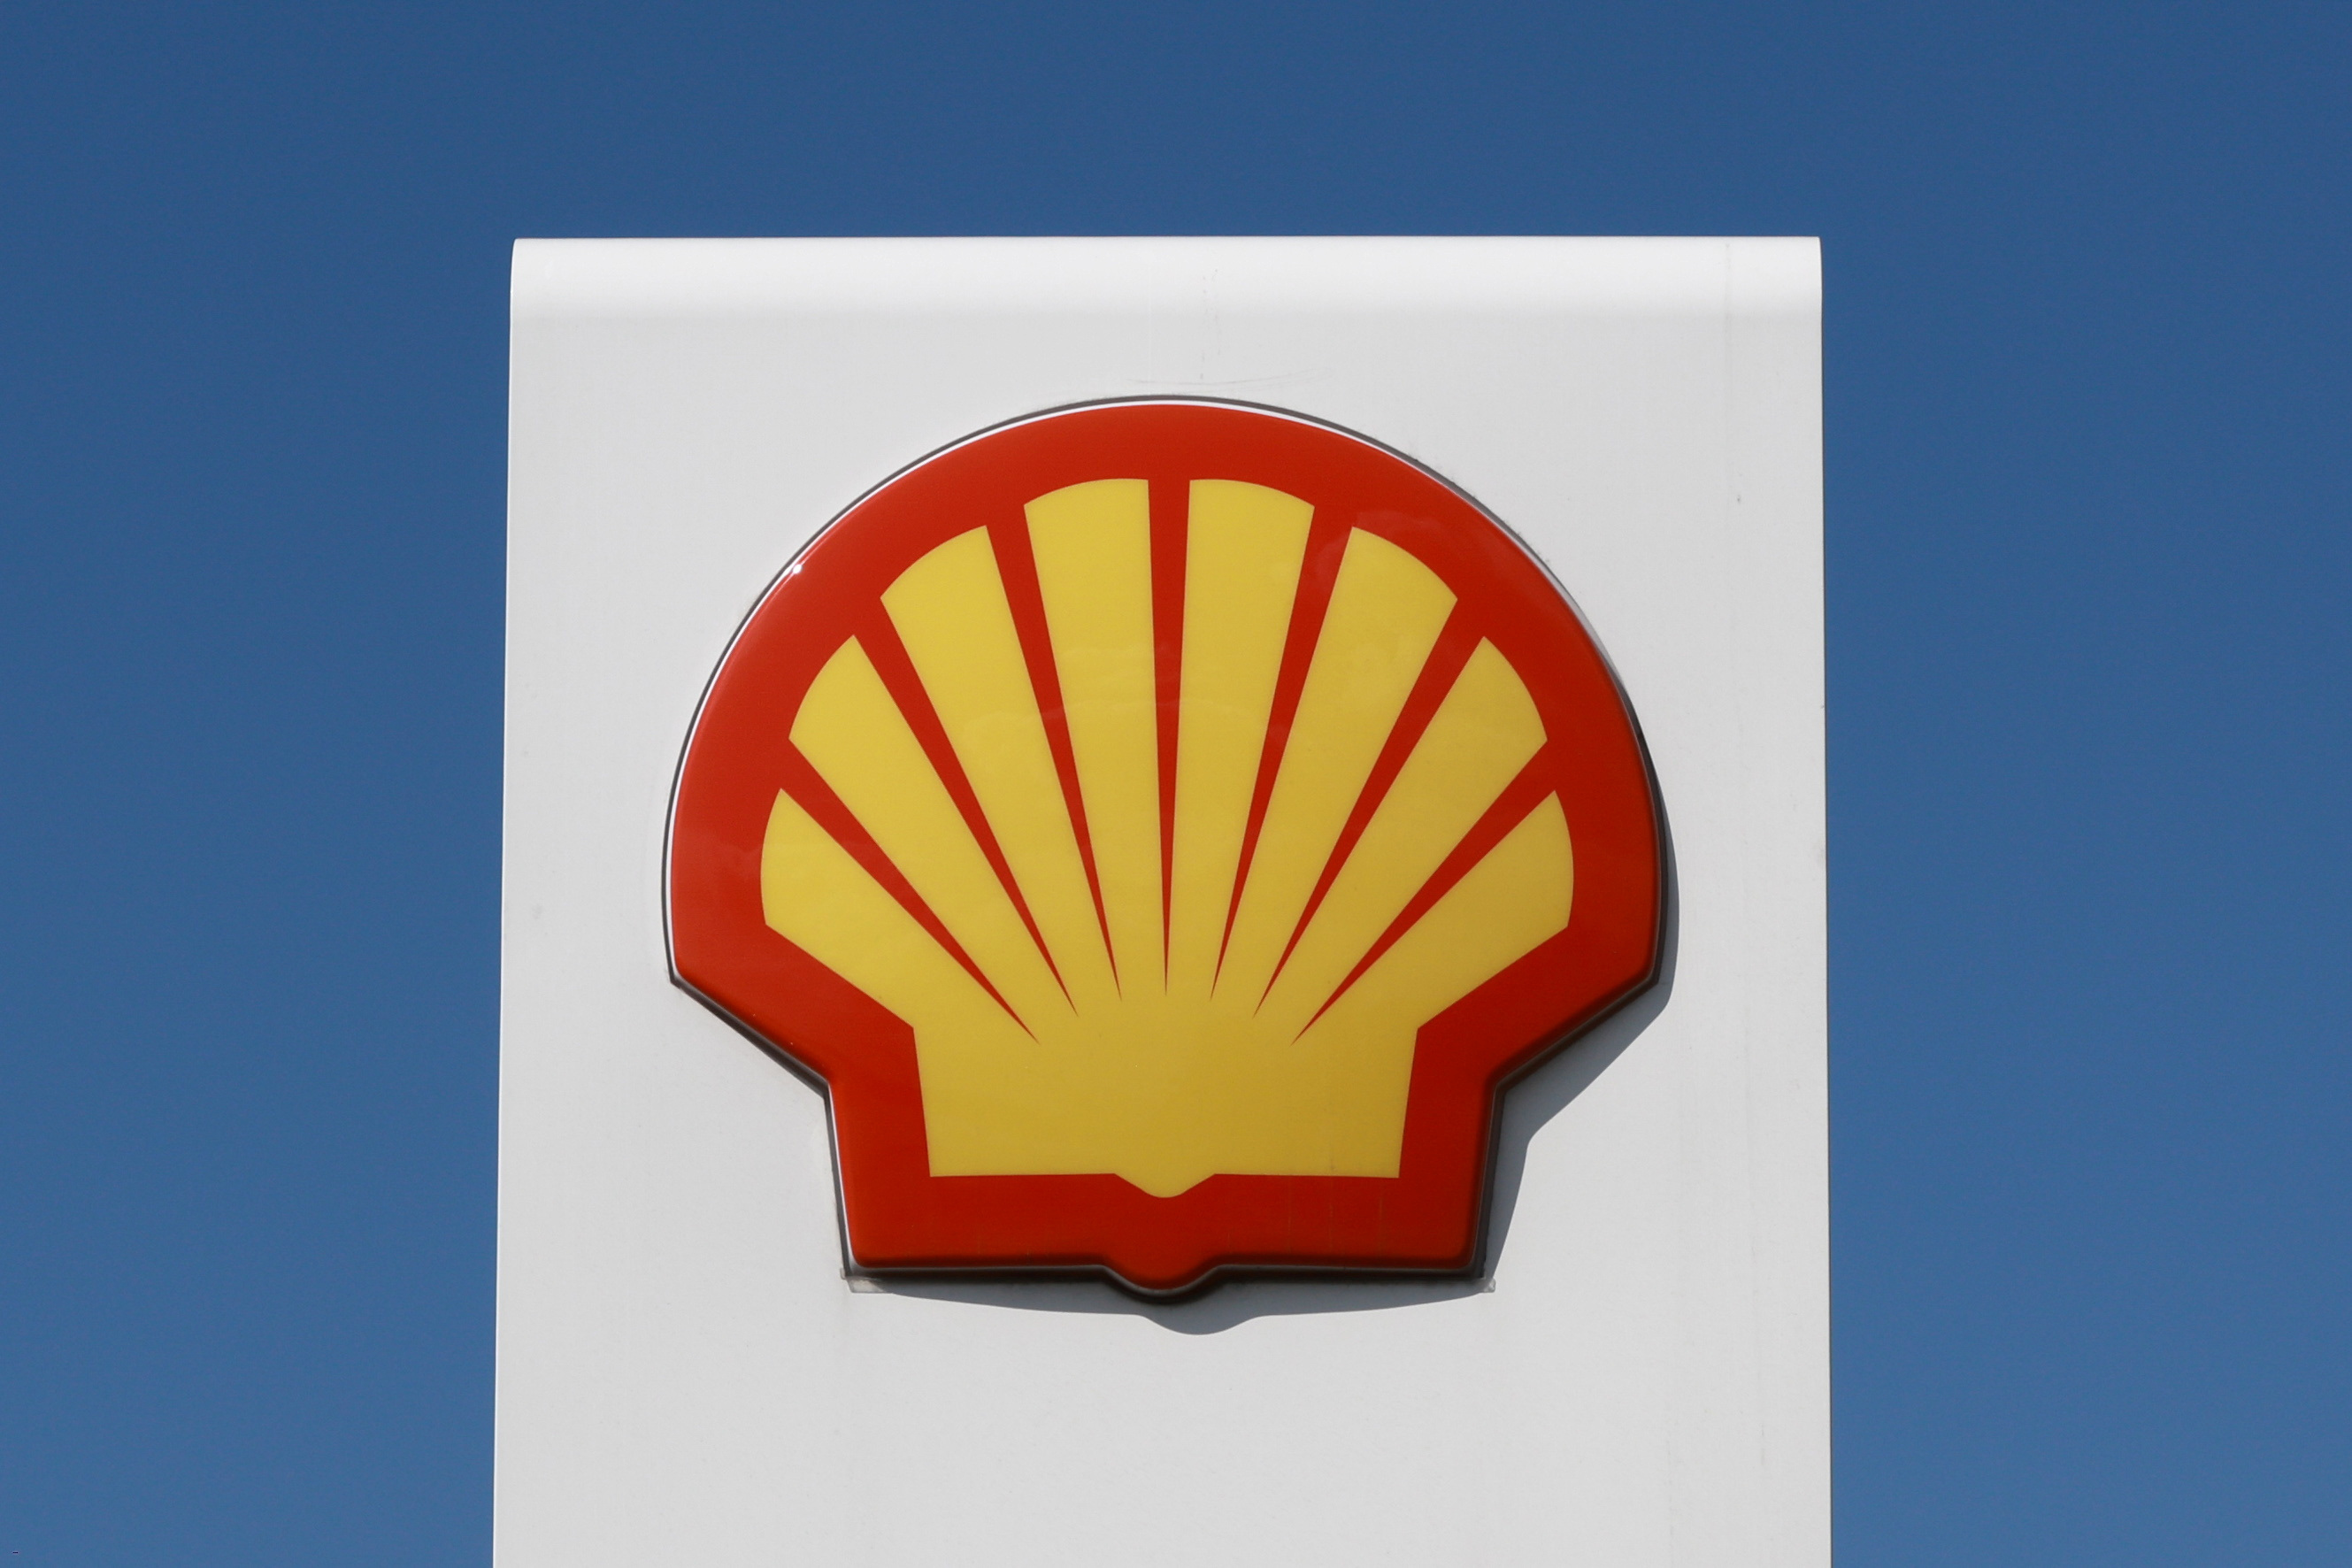 A view shows a board with the logo of Shell at the company's fuel station in Saint Petersburg